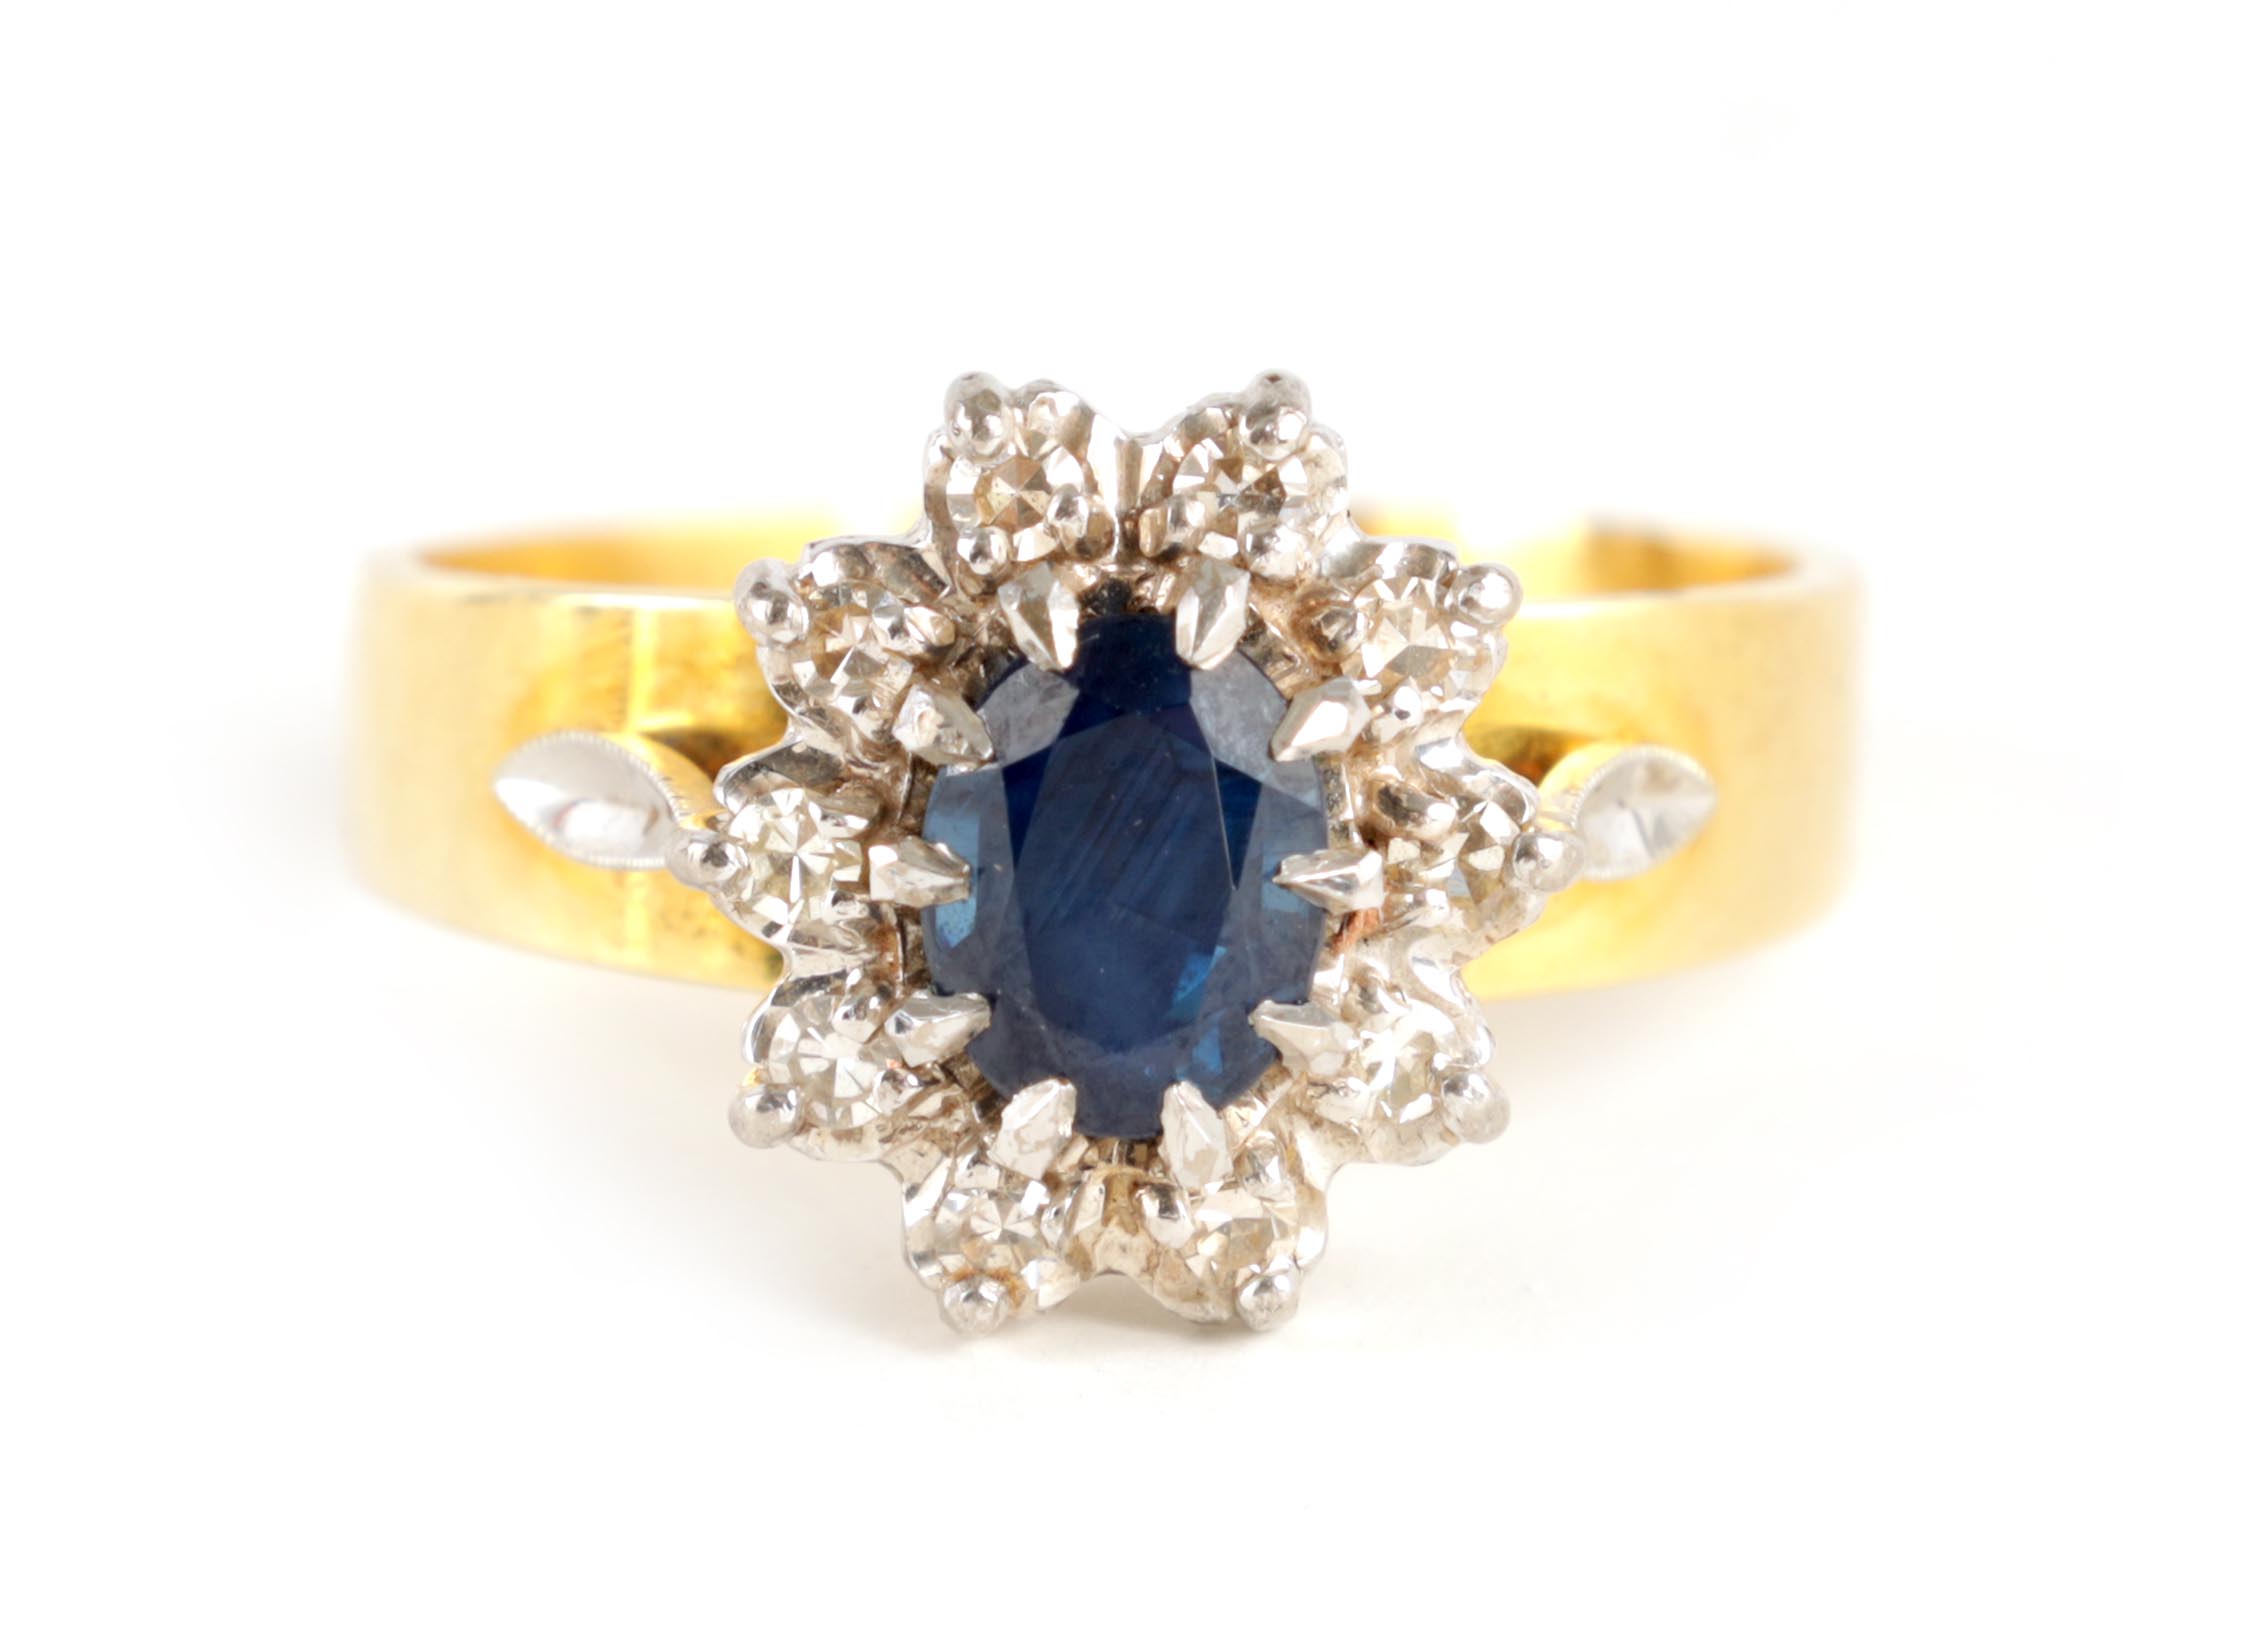 A LADIES 14CT GOLD DIAMOND AND SAPPHIRE RING with oval cut centre stone enclosed by 10 brilliant-cut